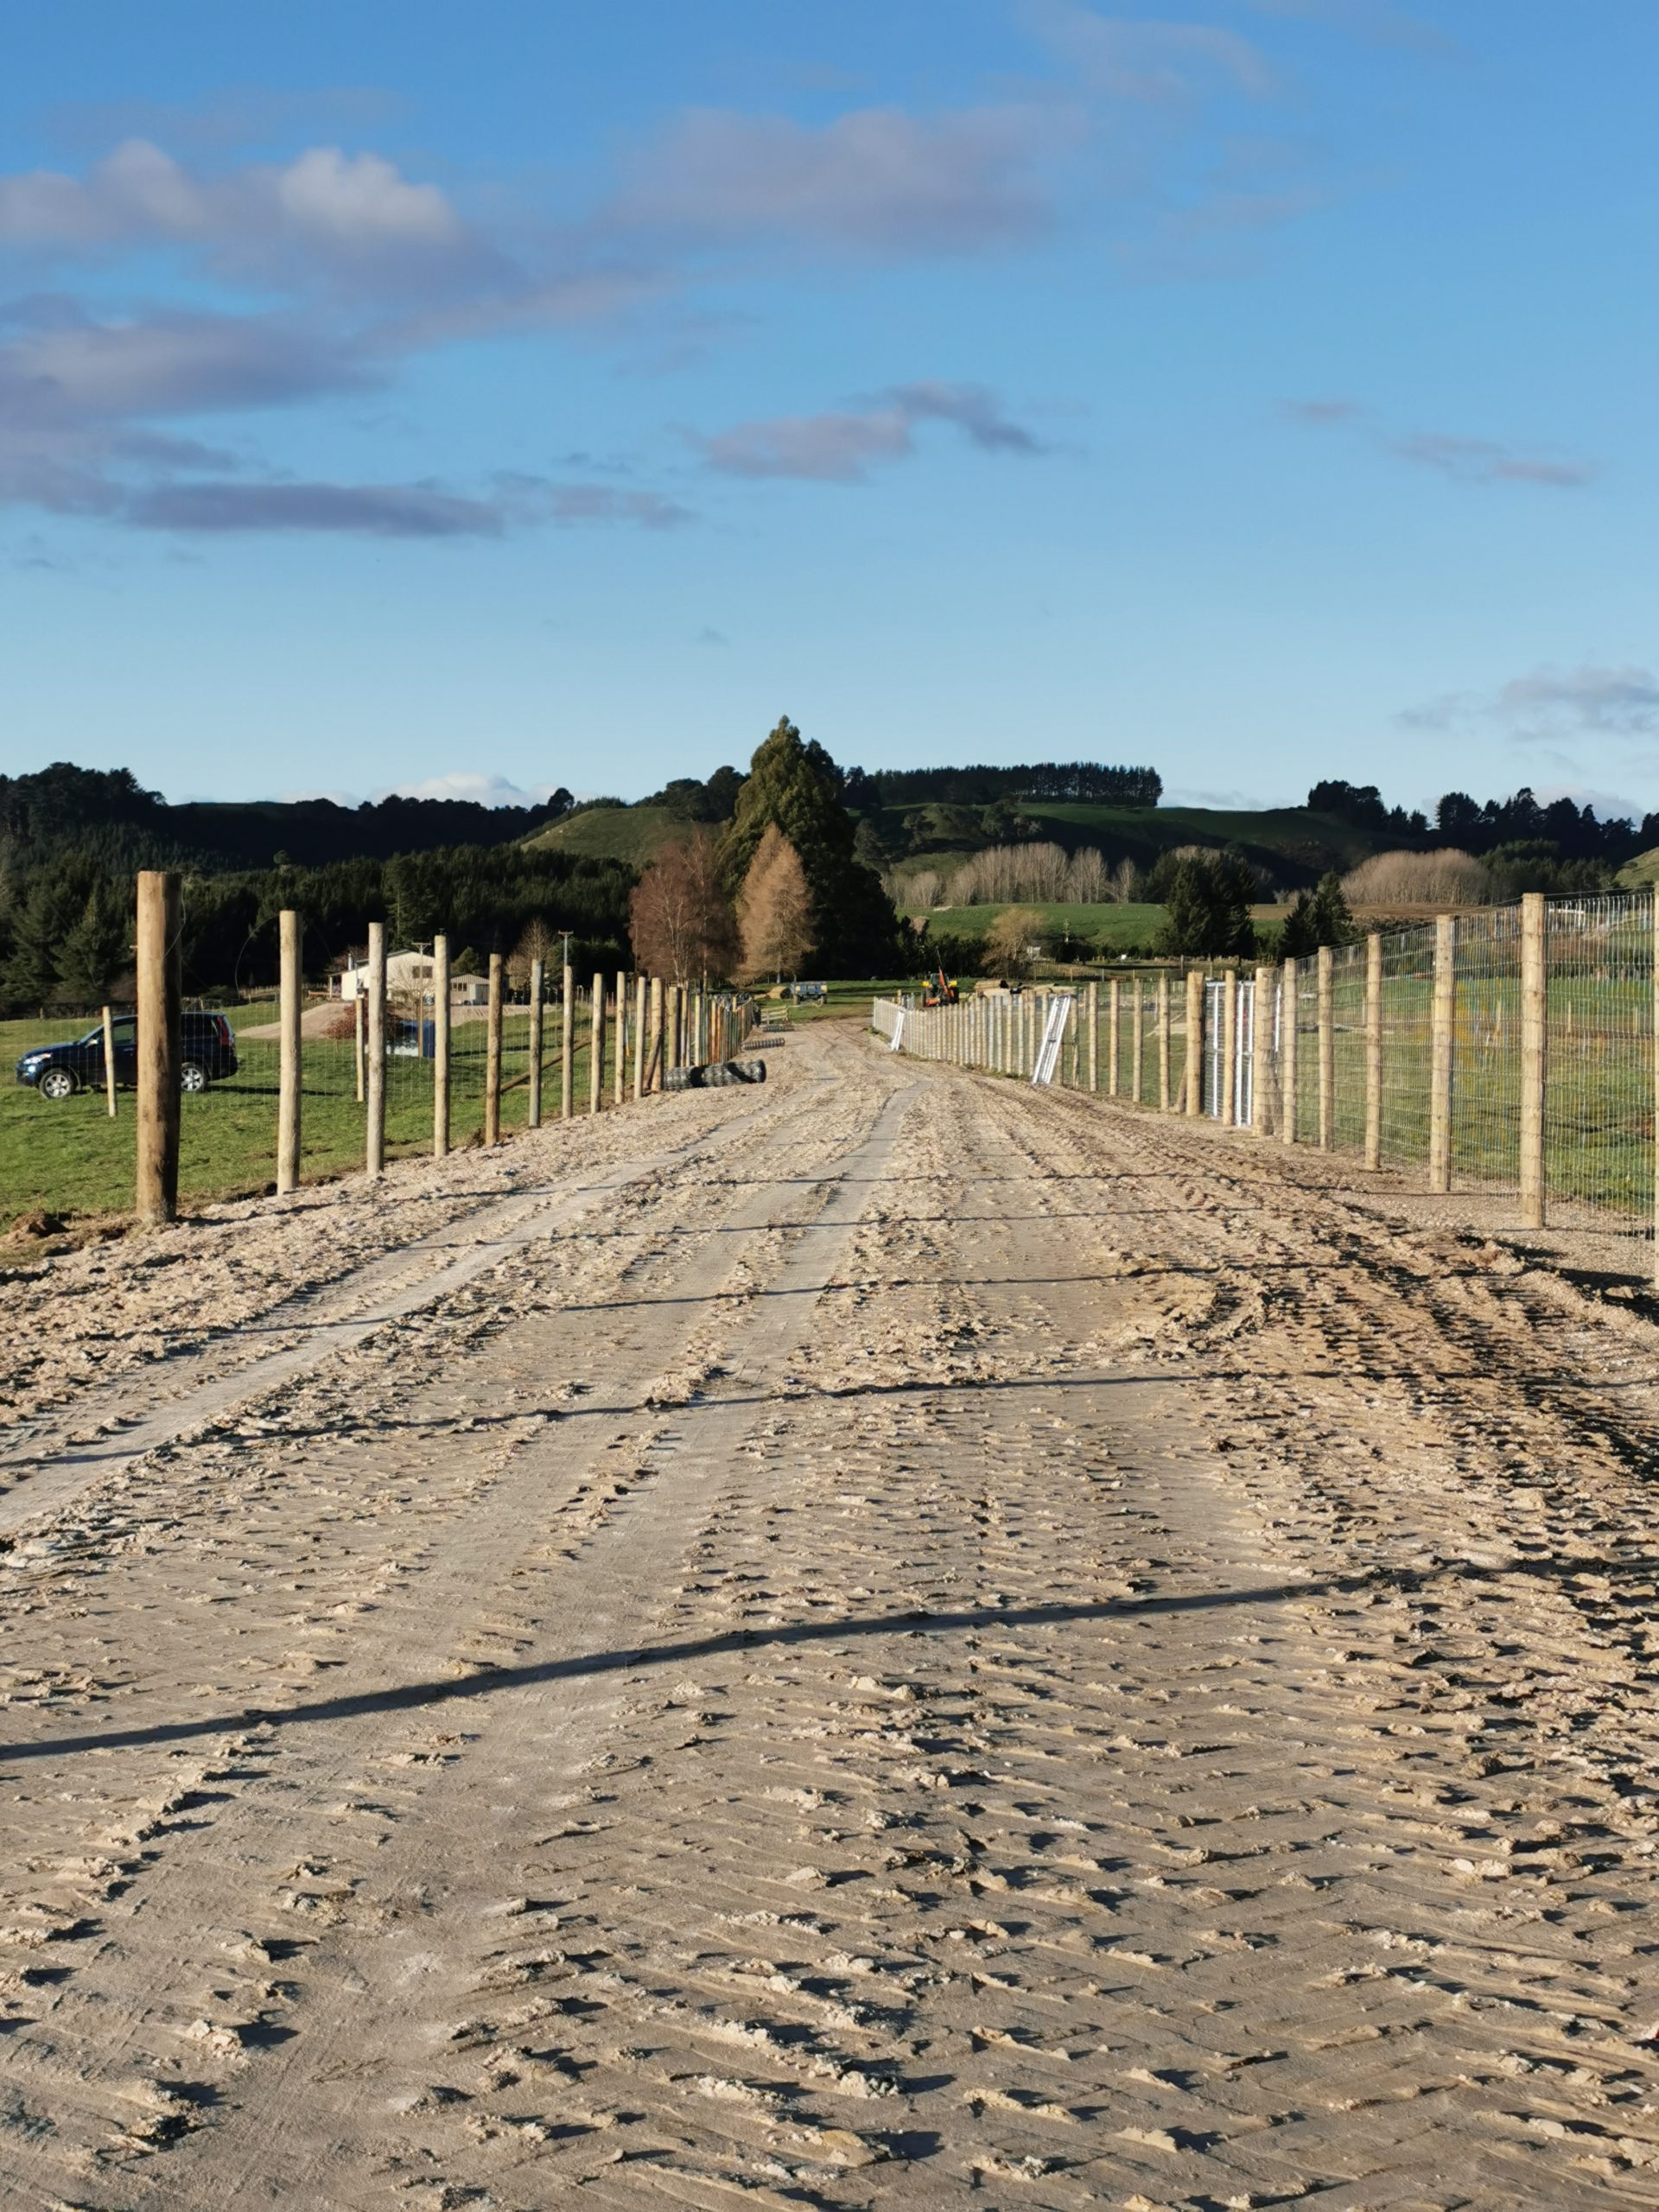 a dirt road with a wooden fence on the side.